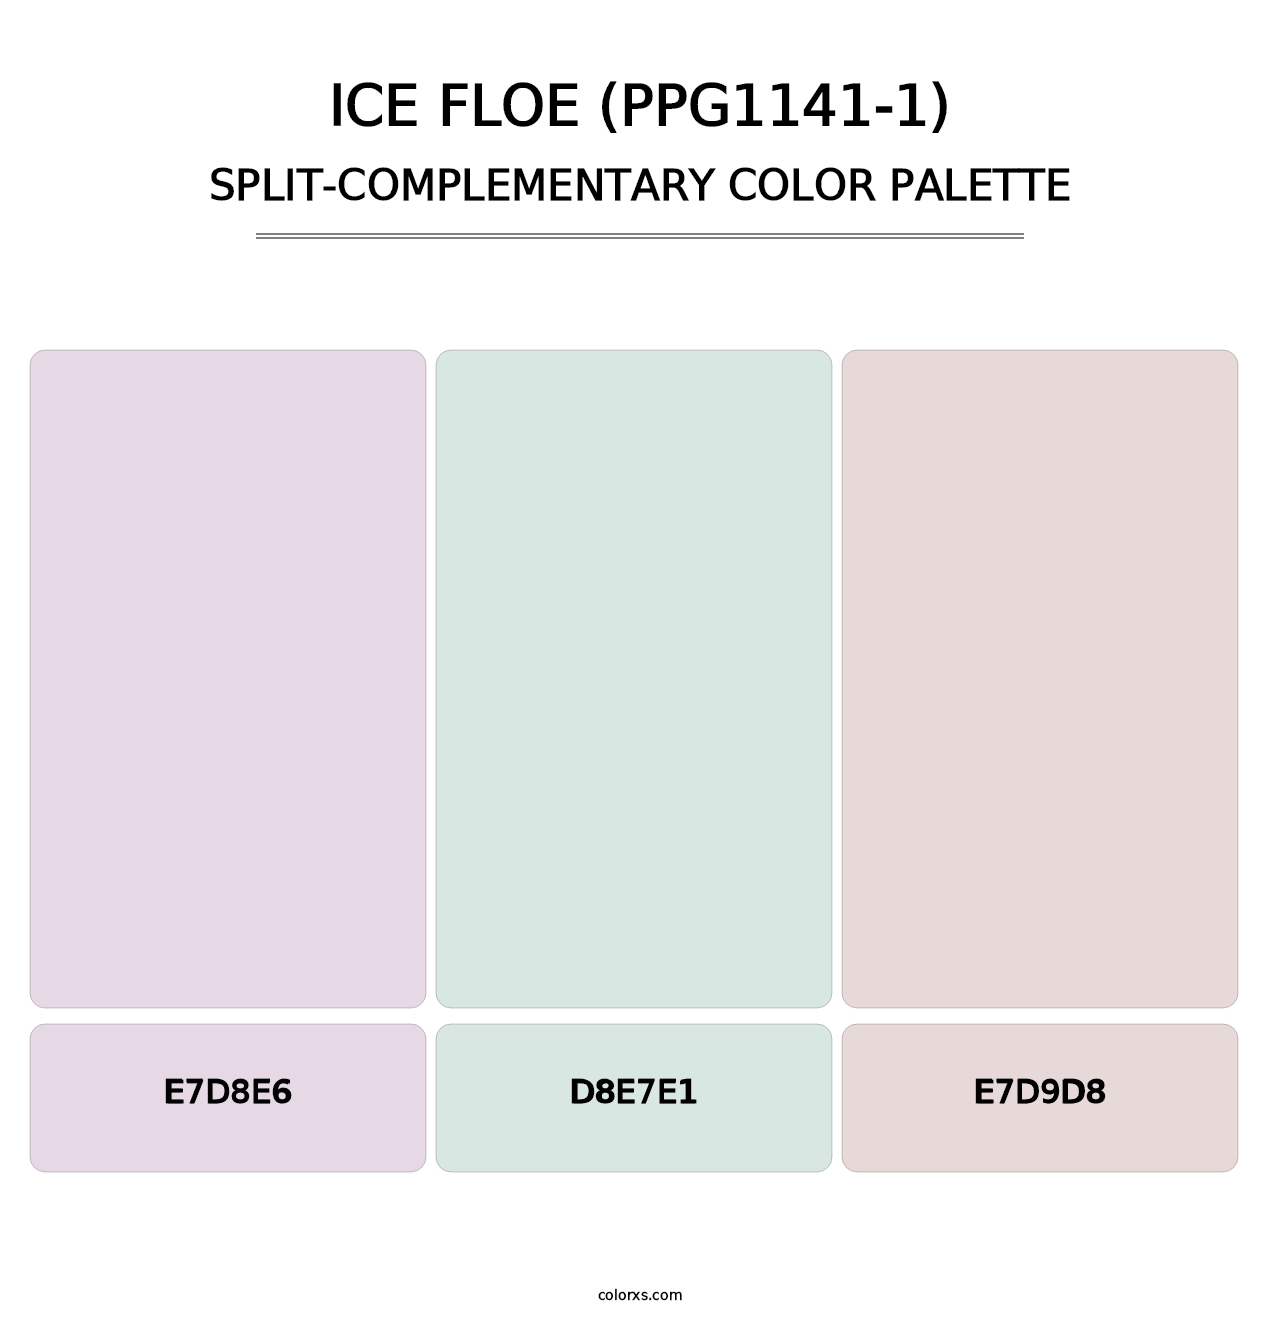 Ice Floe (PPG1141-1) - Split-Complementary Color Palette